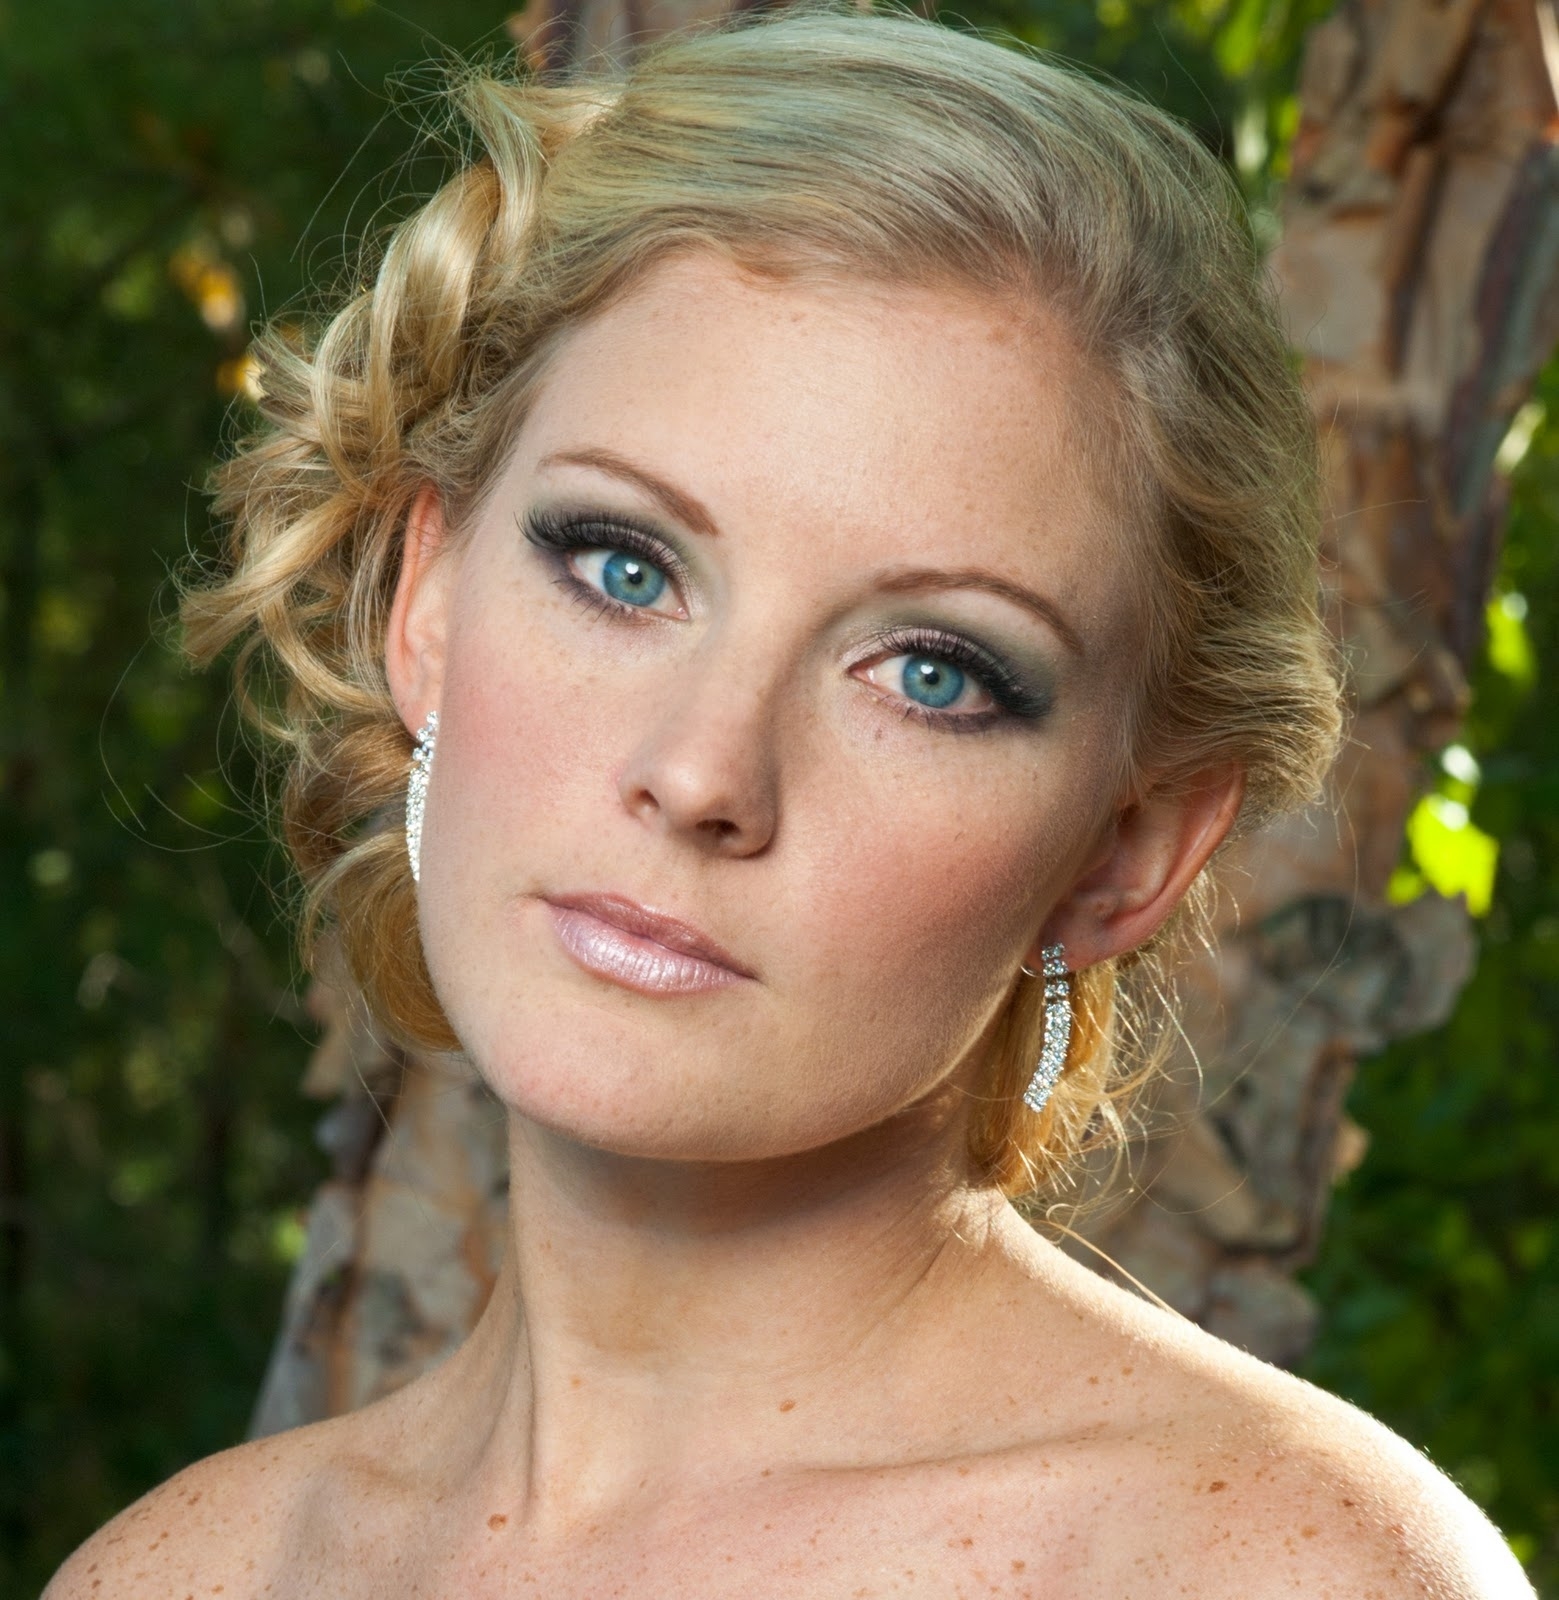 Wedding Makeup Tips For Blue-Eyed Brides With Blond Hair | Bride Sparkle pertaining to Makeup Tips For Blue Eyes Blonde Hair Fair Skin